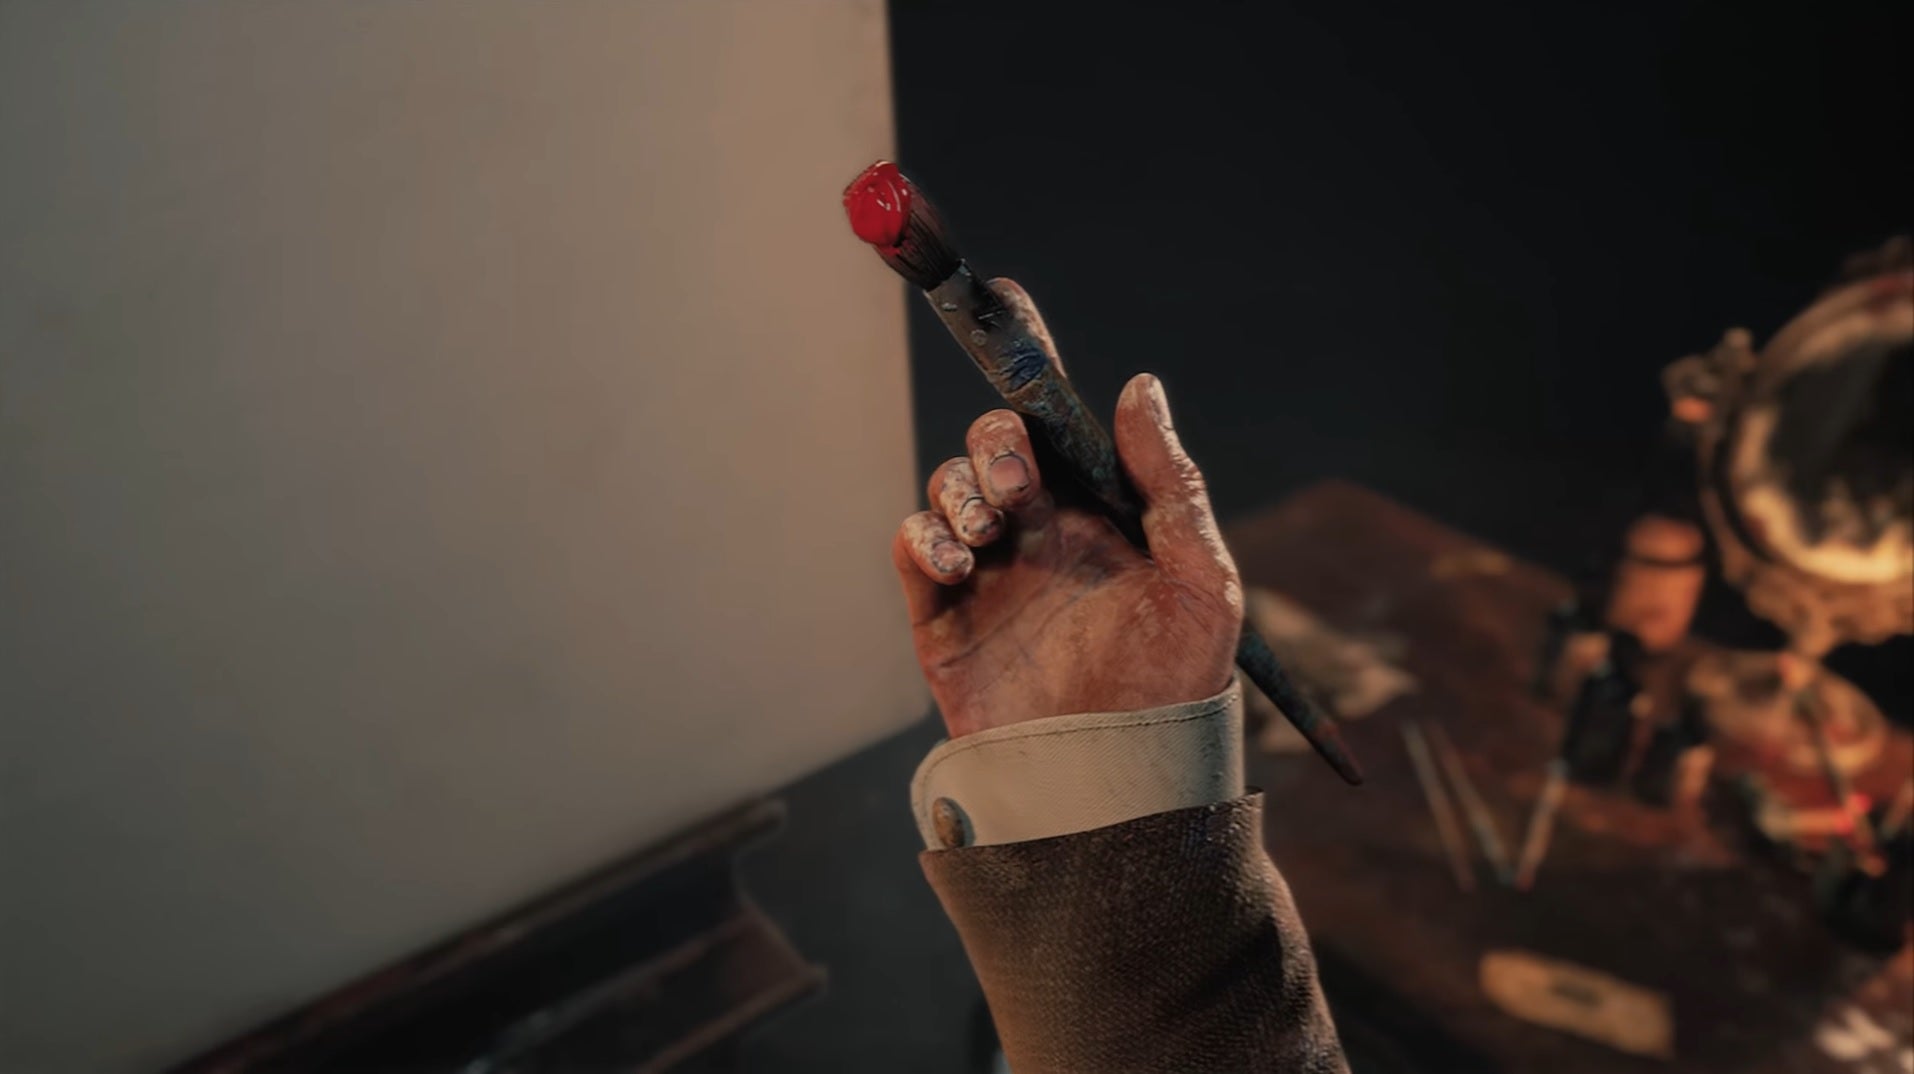 Layers Of Fear 3 teaser trailer - A man's hand holds a paint brush that drips red paint onto his hand